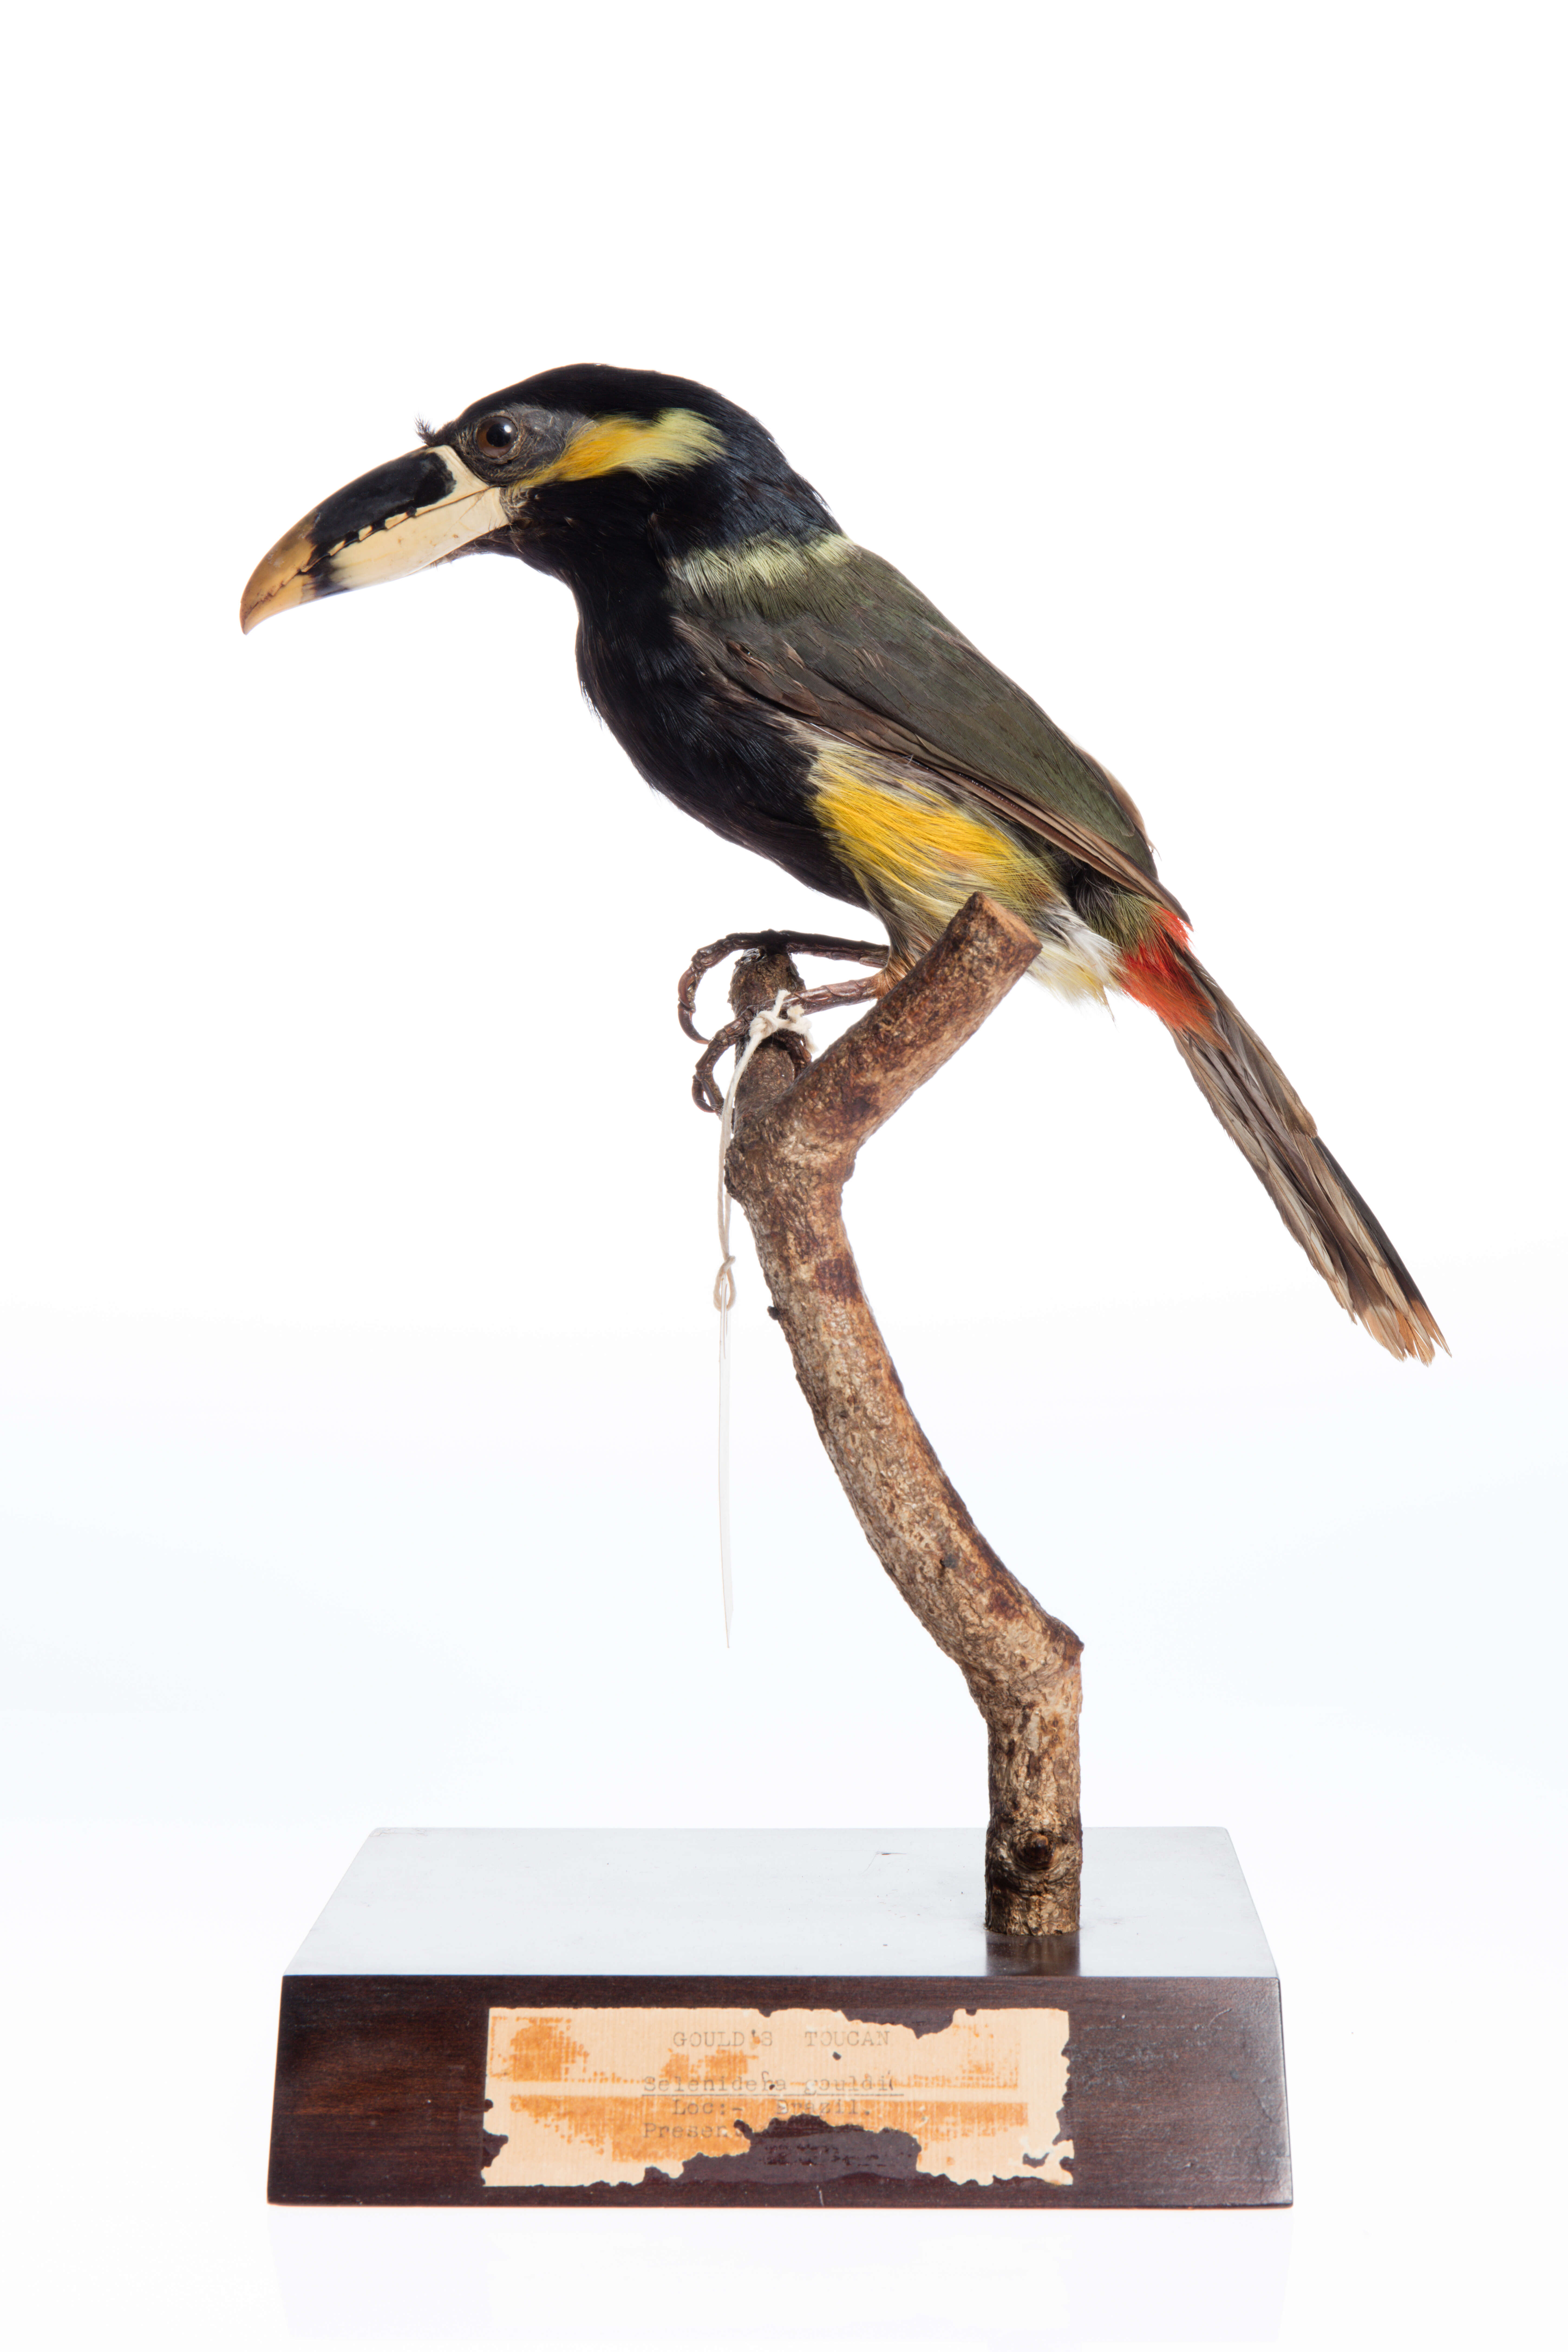 Image of Gould's Toucanet